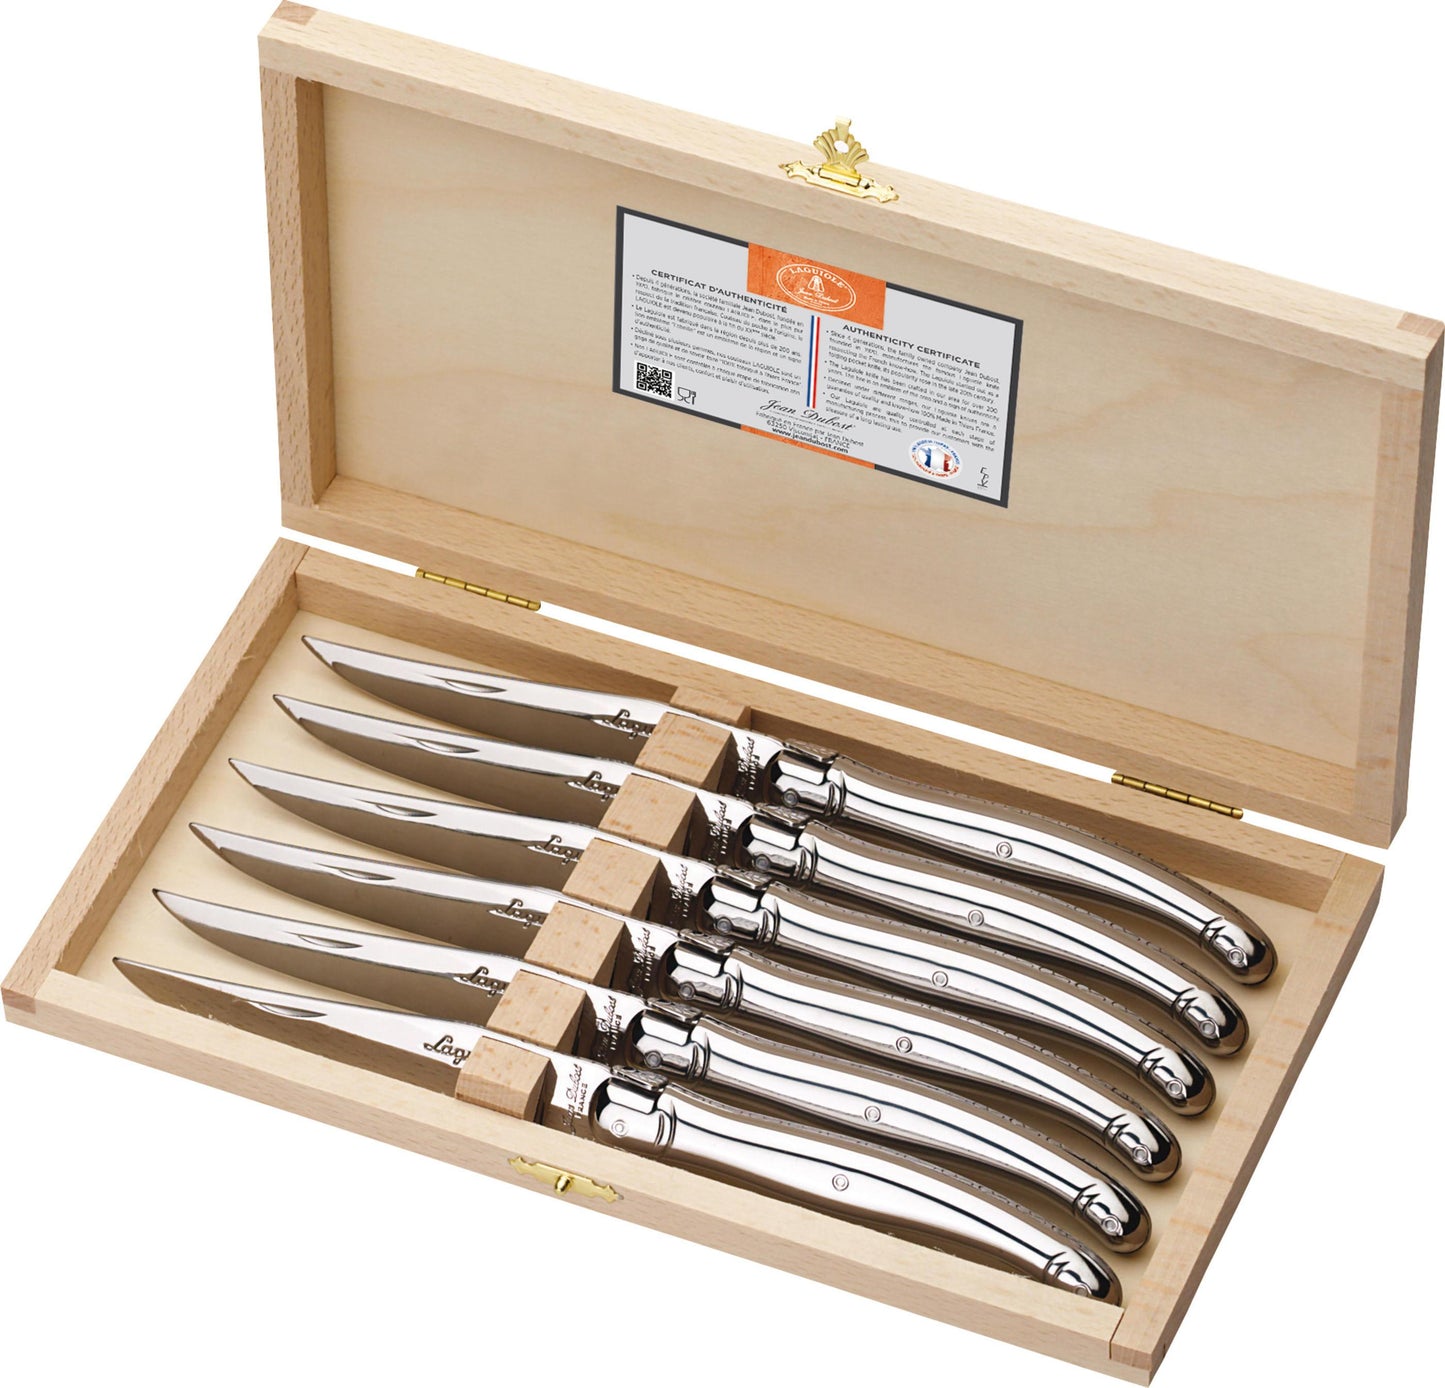 Laguiole Steak Knives Set of 6pc set Assorted Wood Handle in Satin